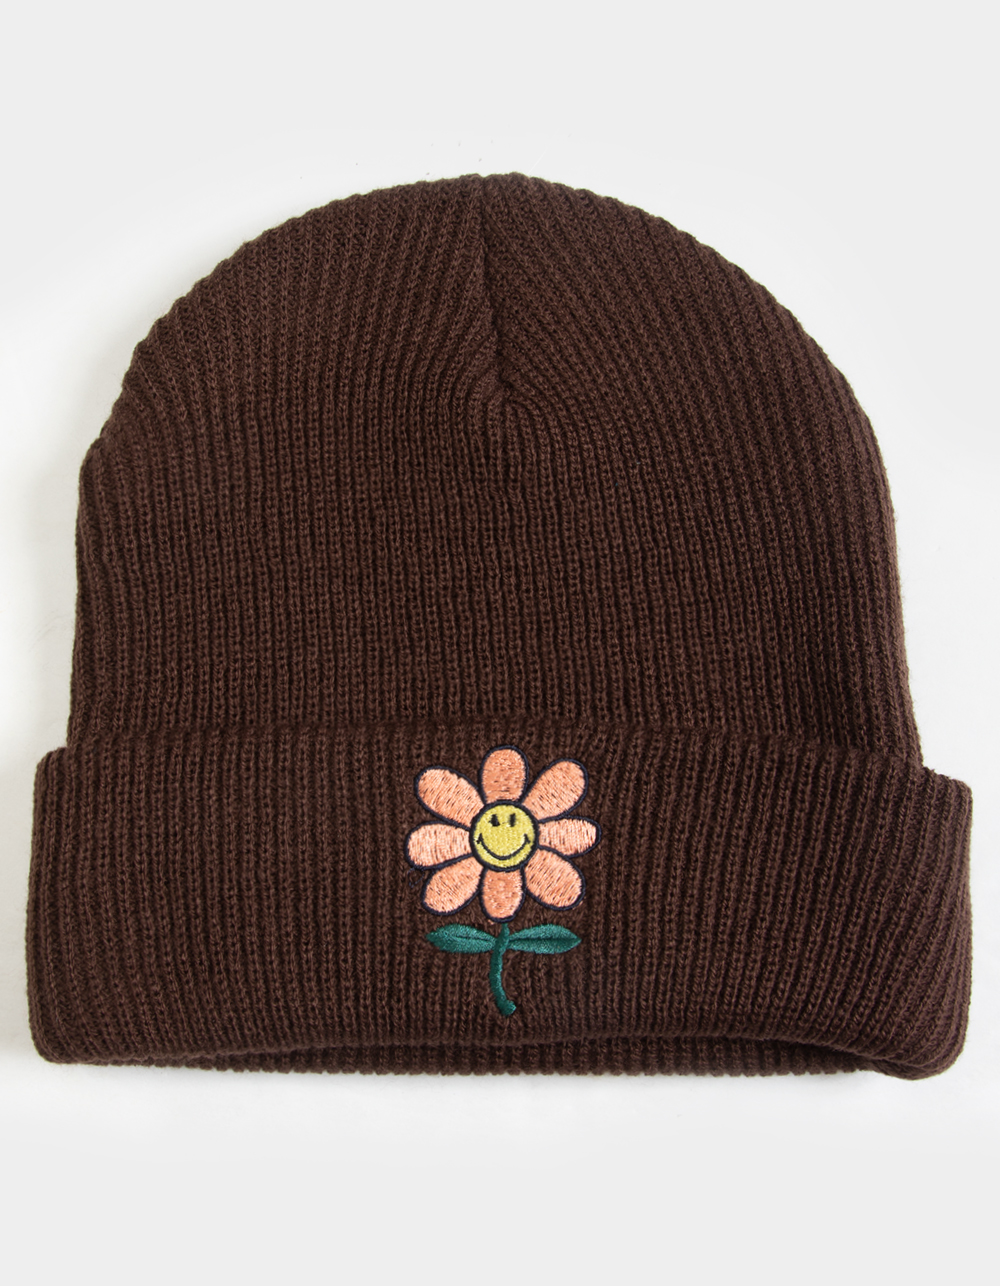 RSQ x Smiley Flower Womens Beanie - BROWN | Tillys